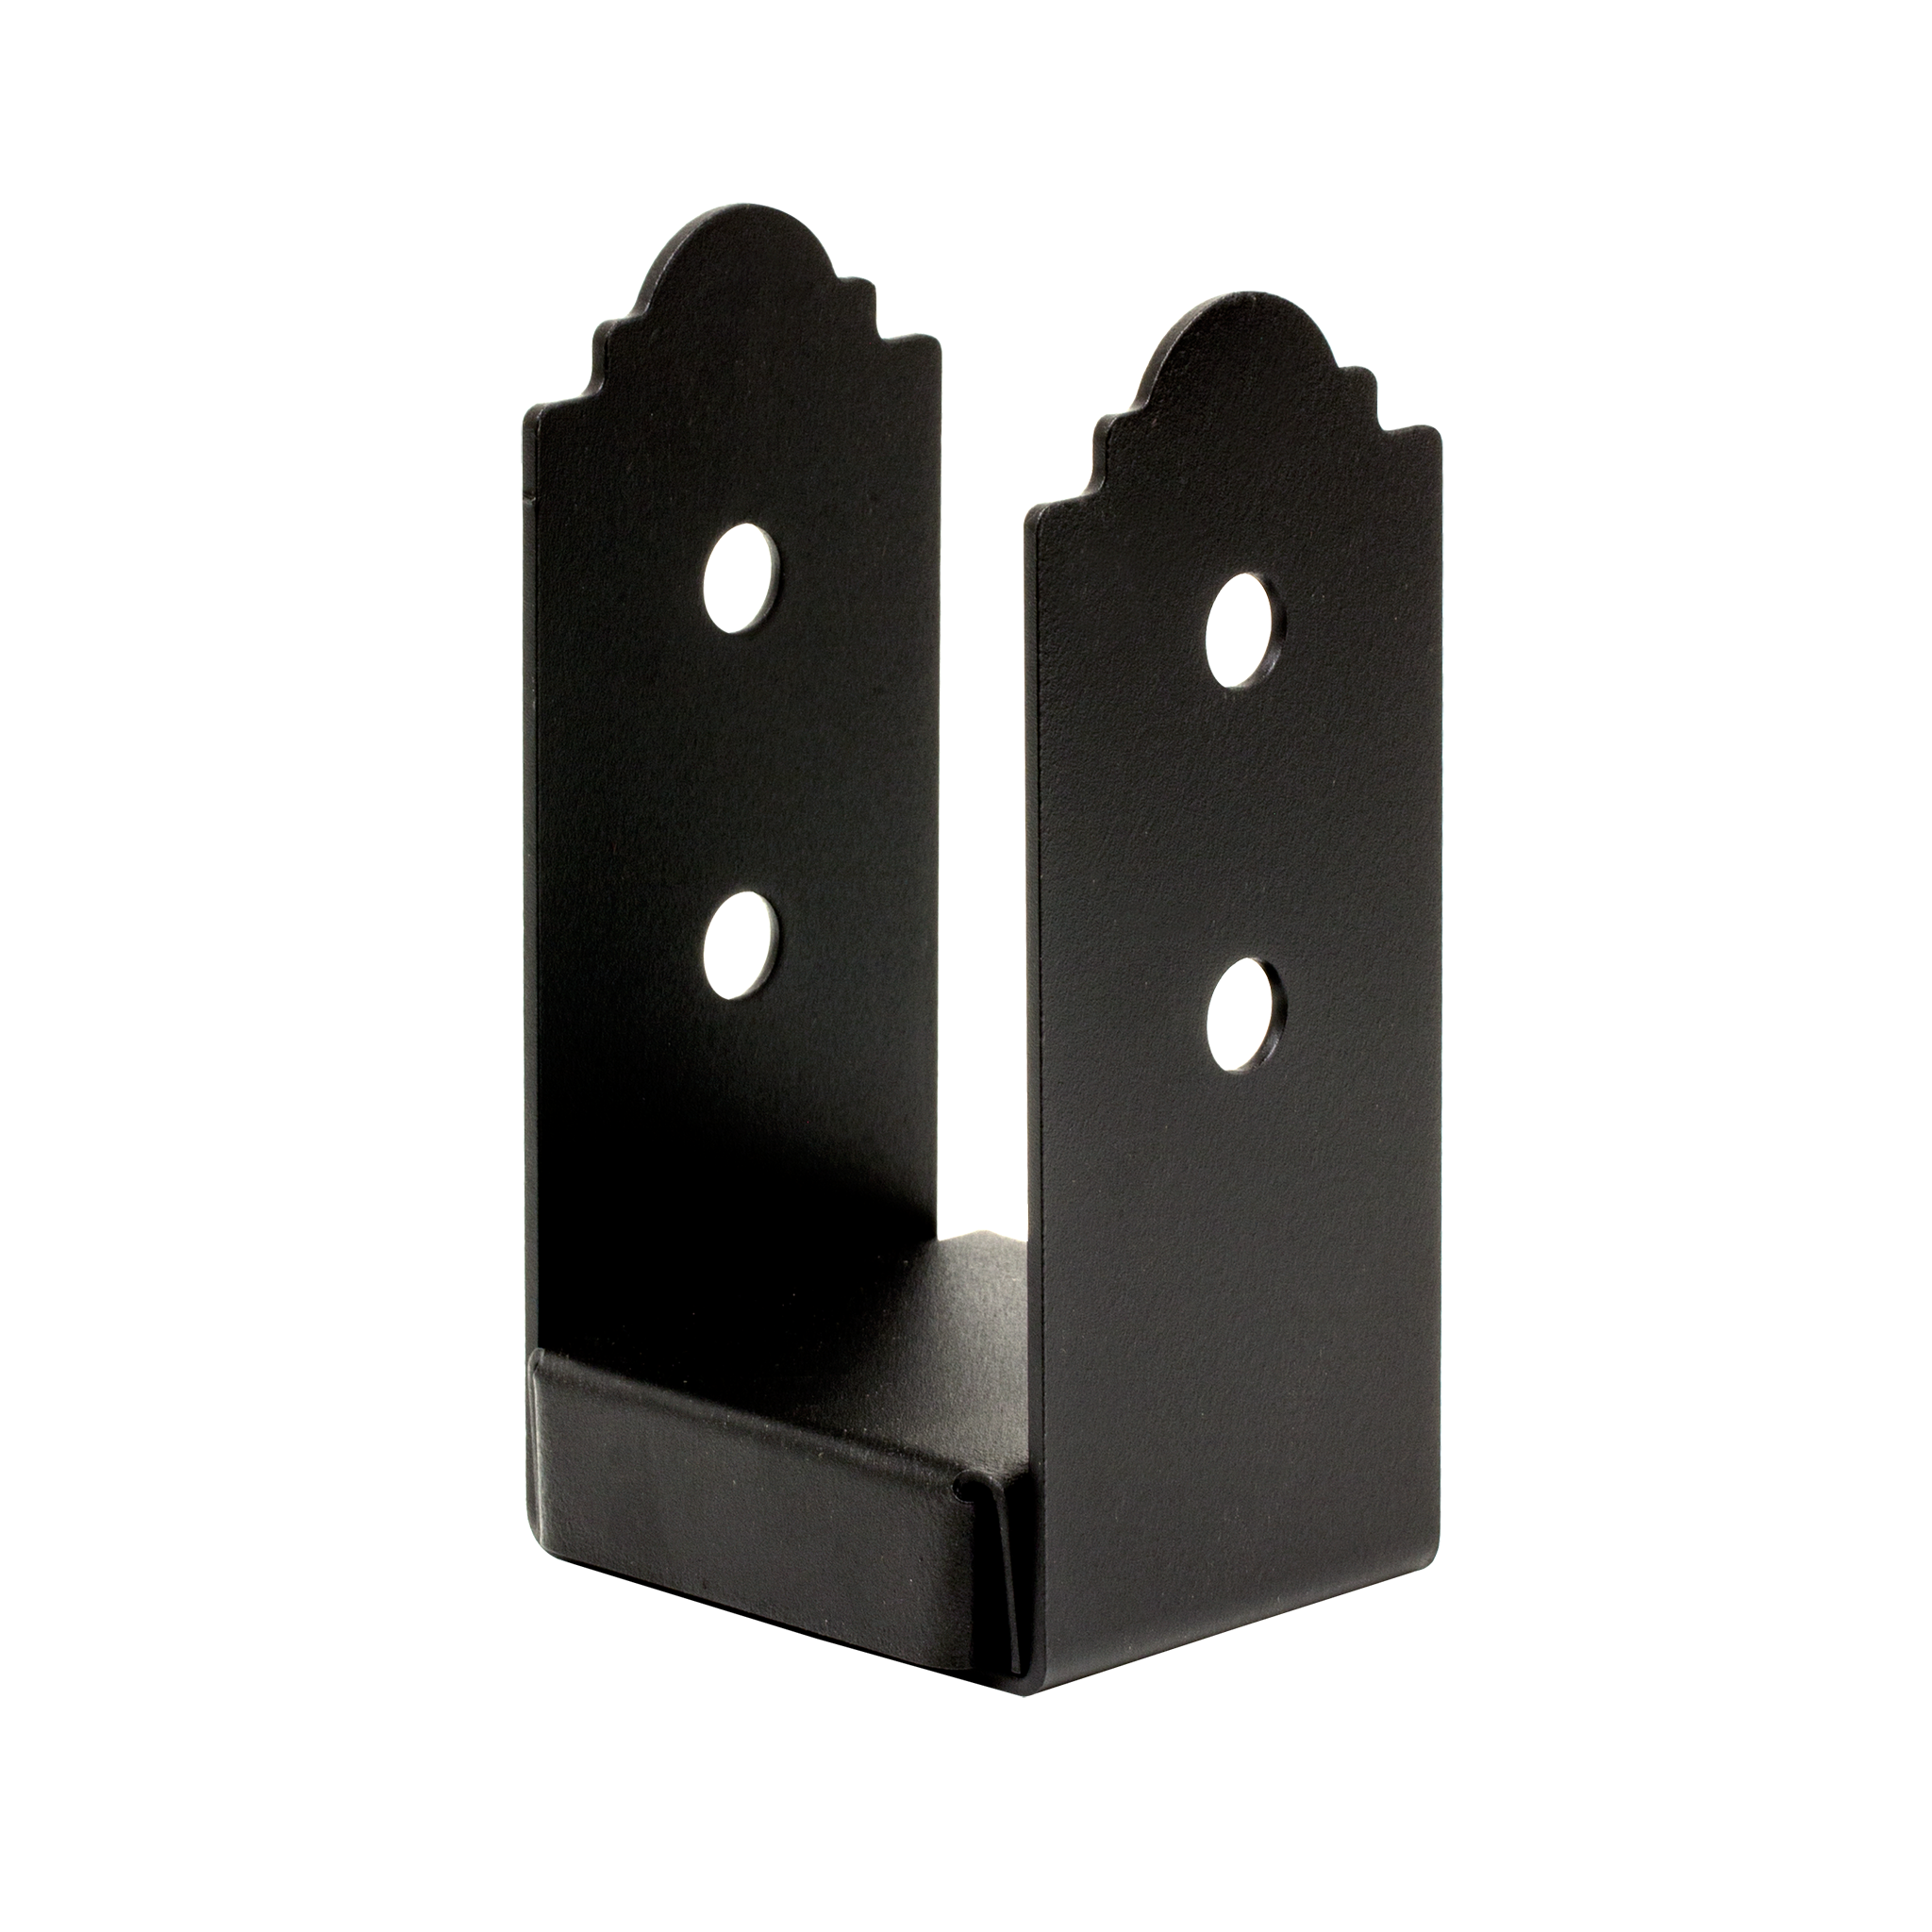 Outdoor Accents® Post Base for 4x4, ZMAX® Black Powder-Coated